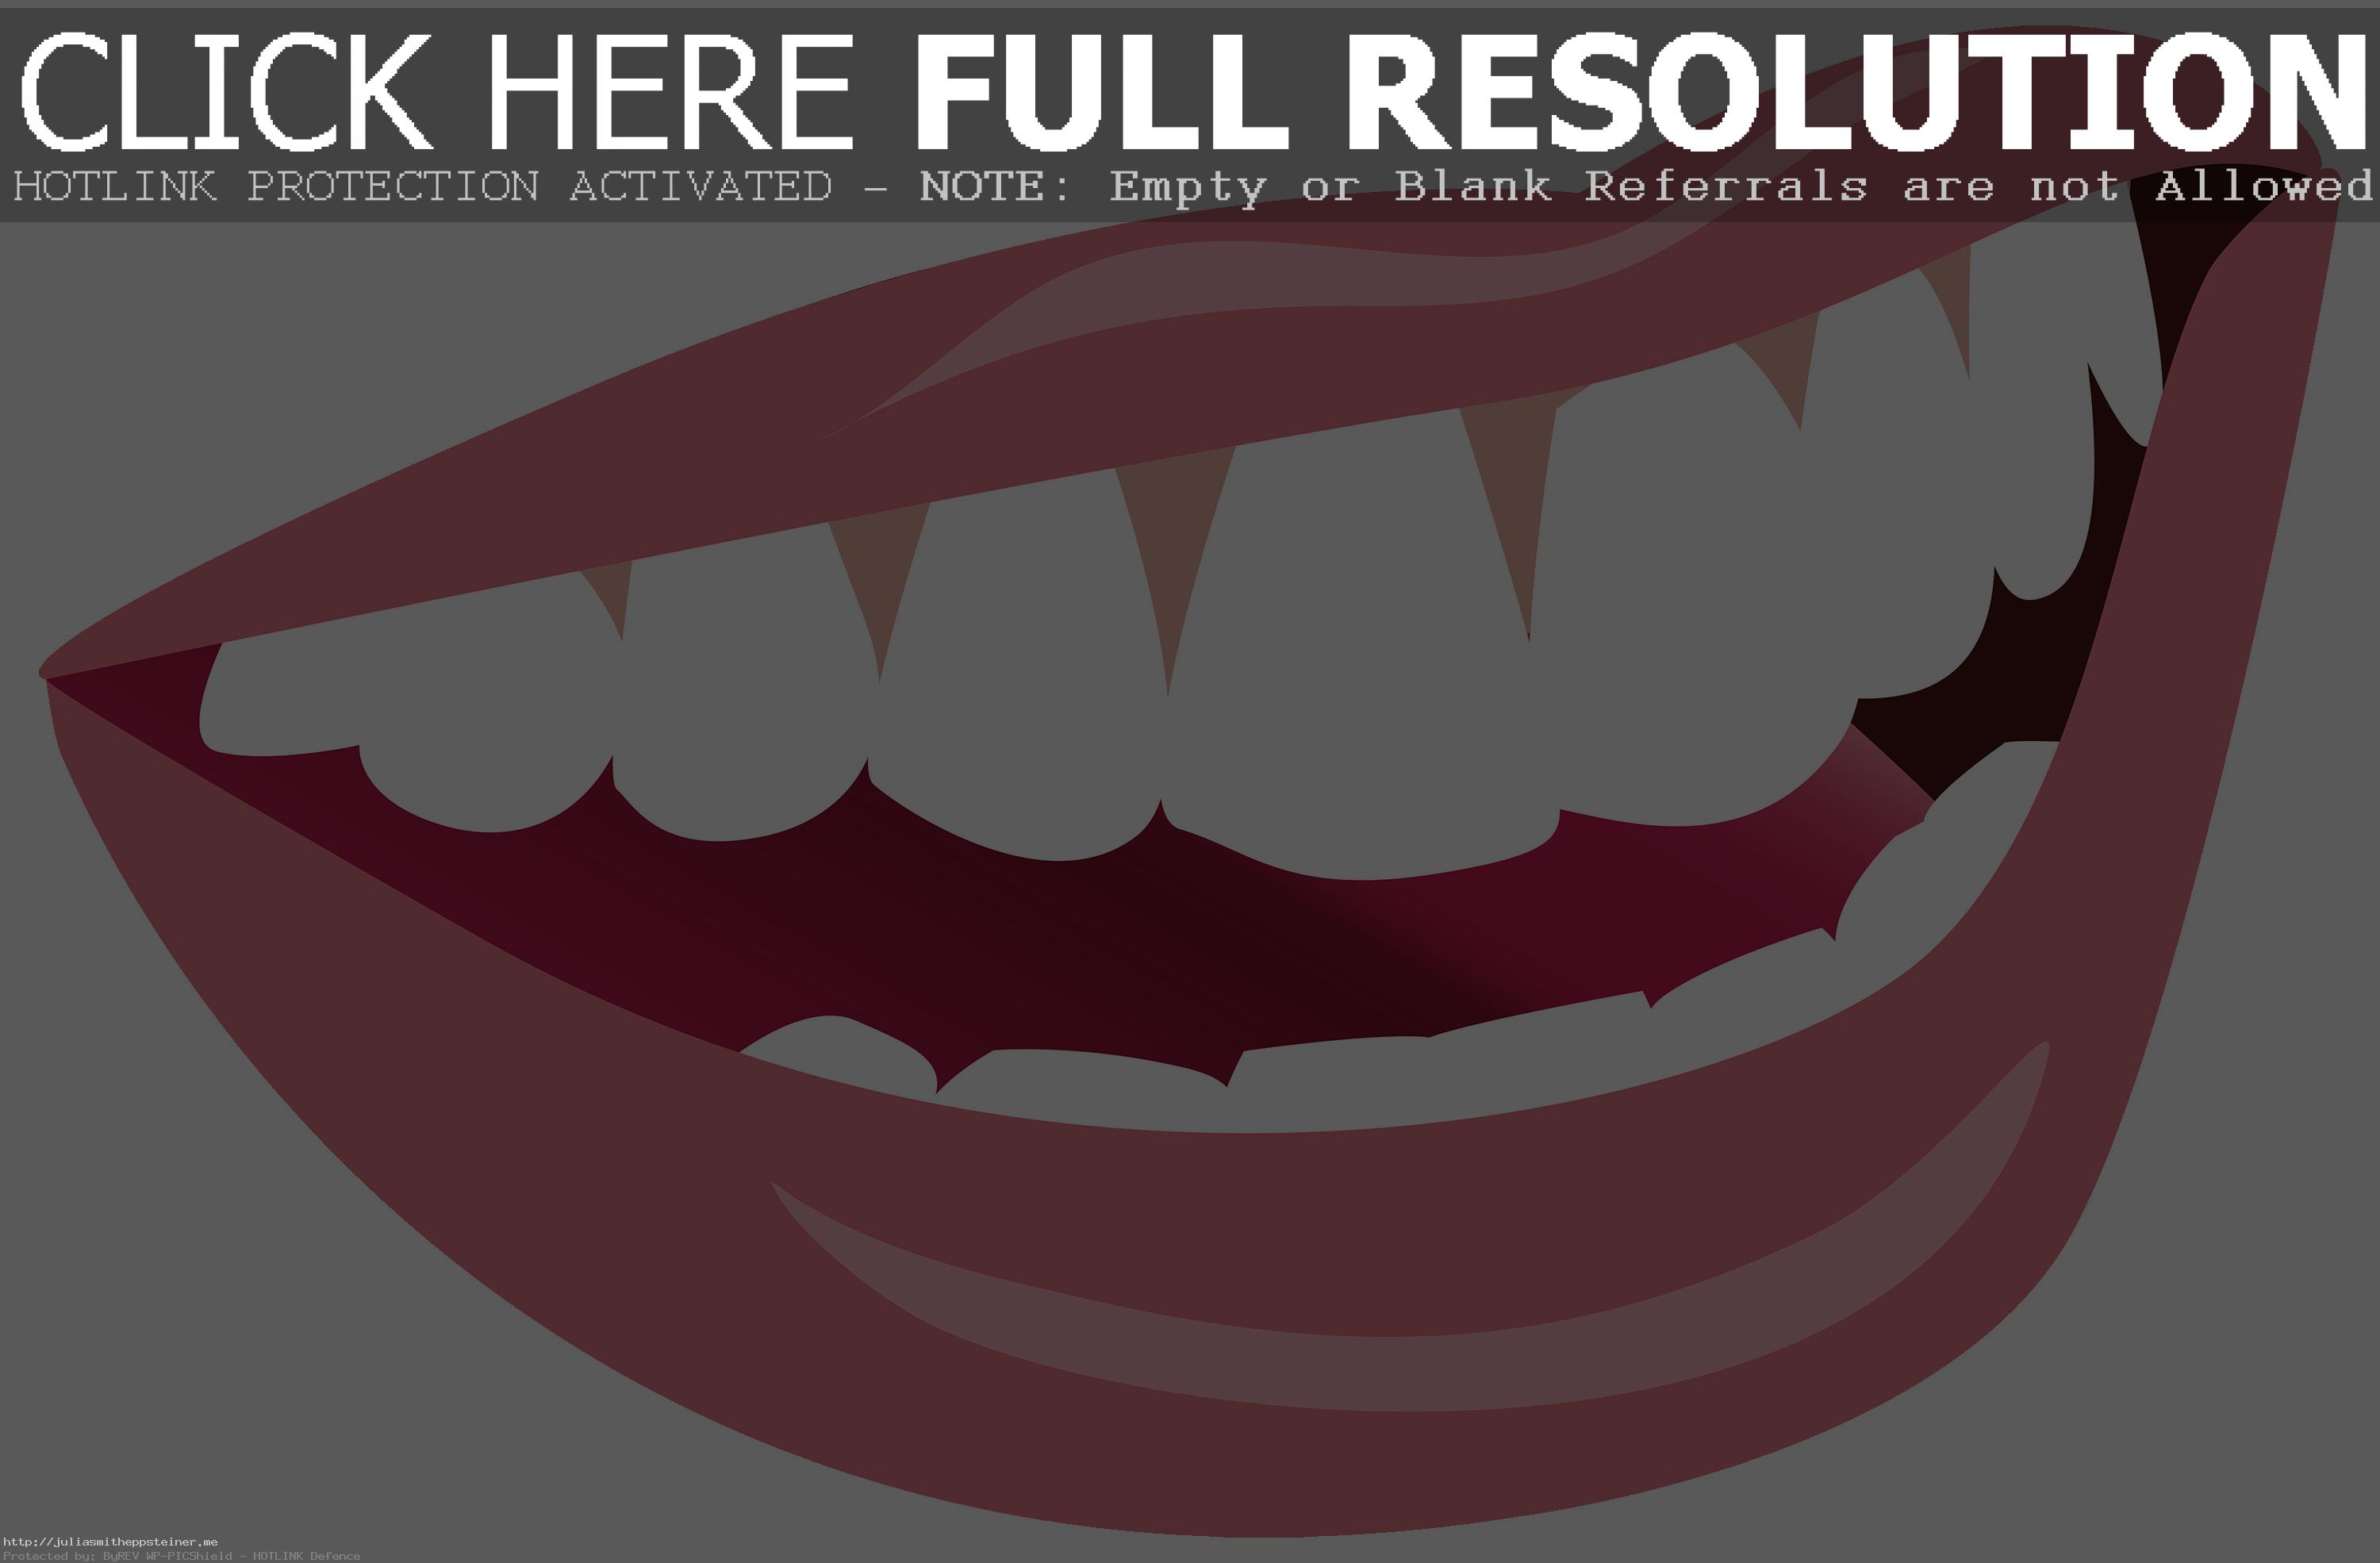 mouth clipart - Google Search